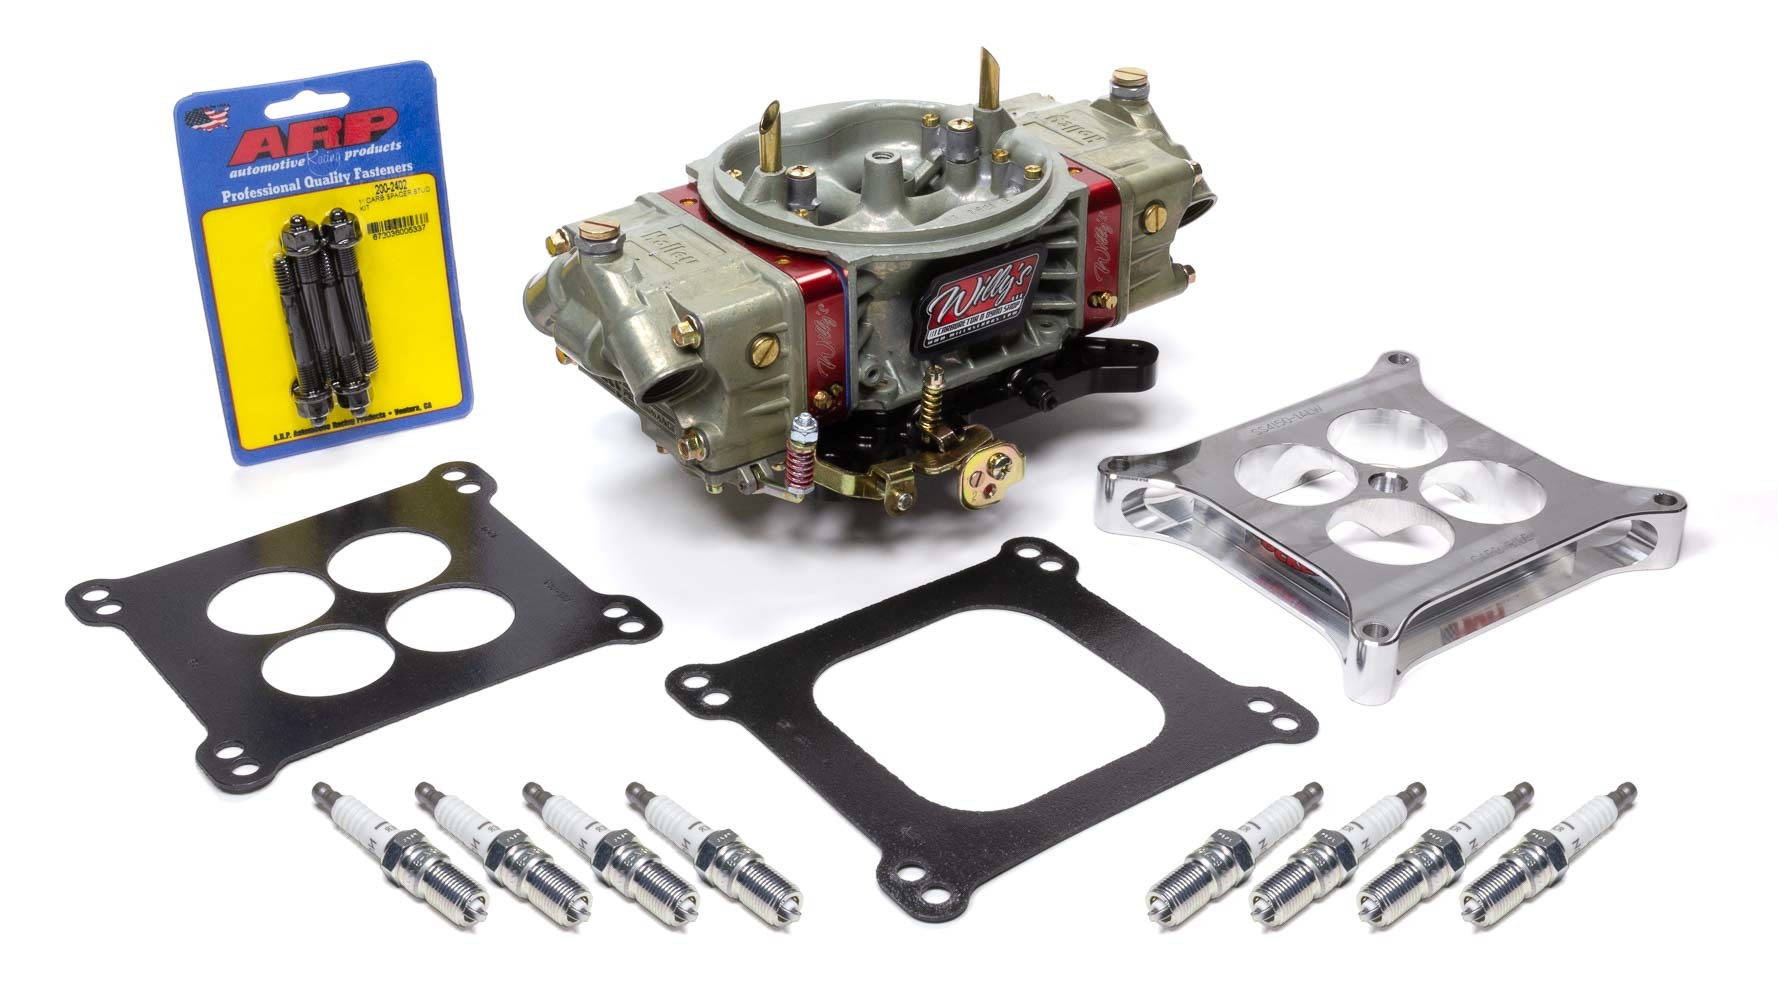 Willys Carb 604CRATE Carburetor, GM604 Power Kit, 4-Barrel, 750 CFM, Square Bore, No Choke, Mechanical Secondary, Dual Inlet, Fasteners / Gaskets / Spacer / Spark Plugs Included, Chromate, 604 Crate Engine, Kit